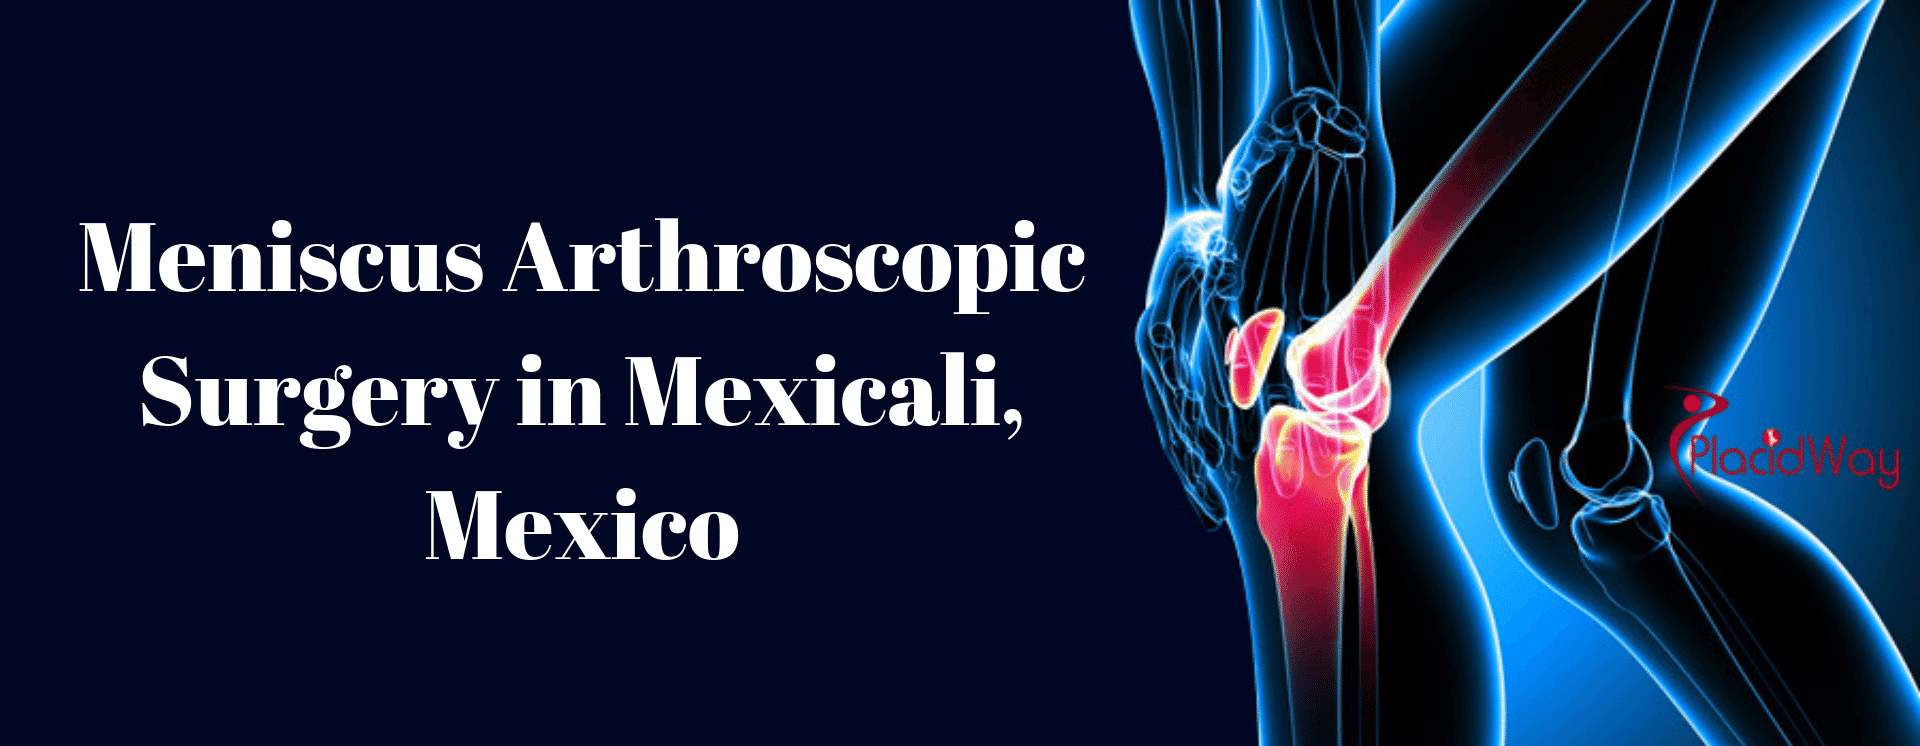 Popular Package for Meniscus Arthroscopic Surgery in Mexicali, Mexico